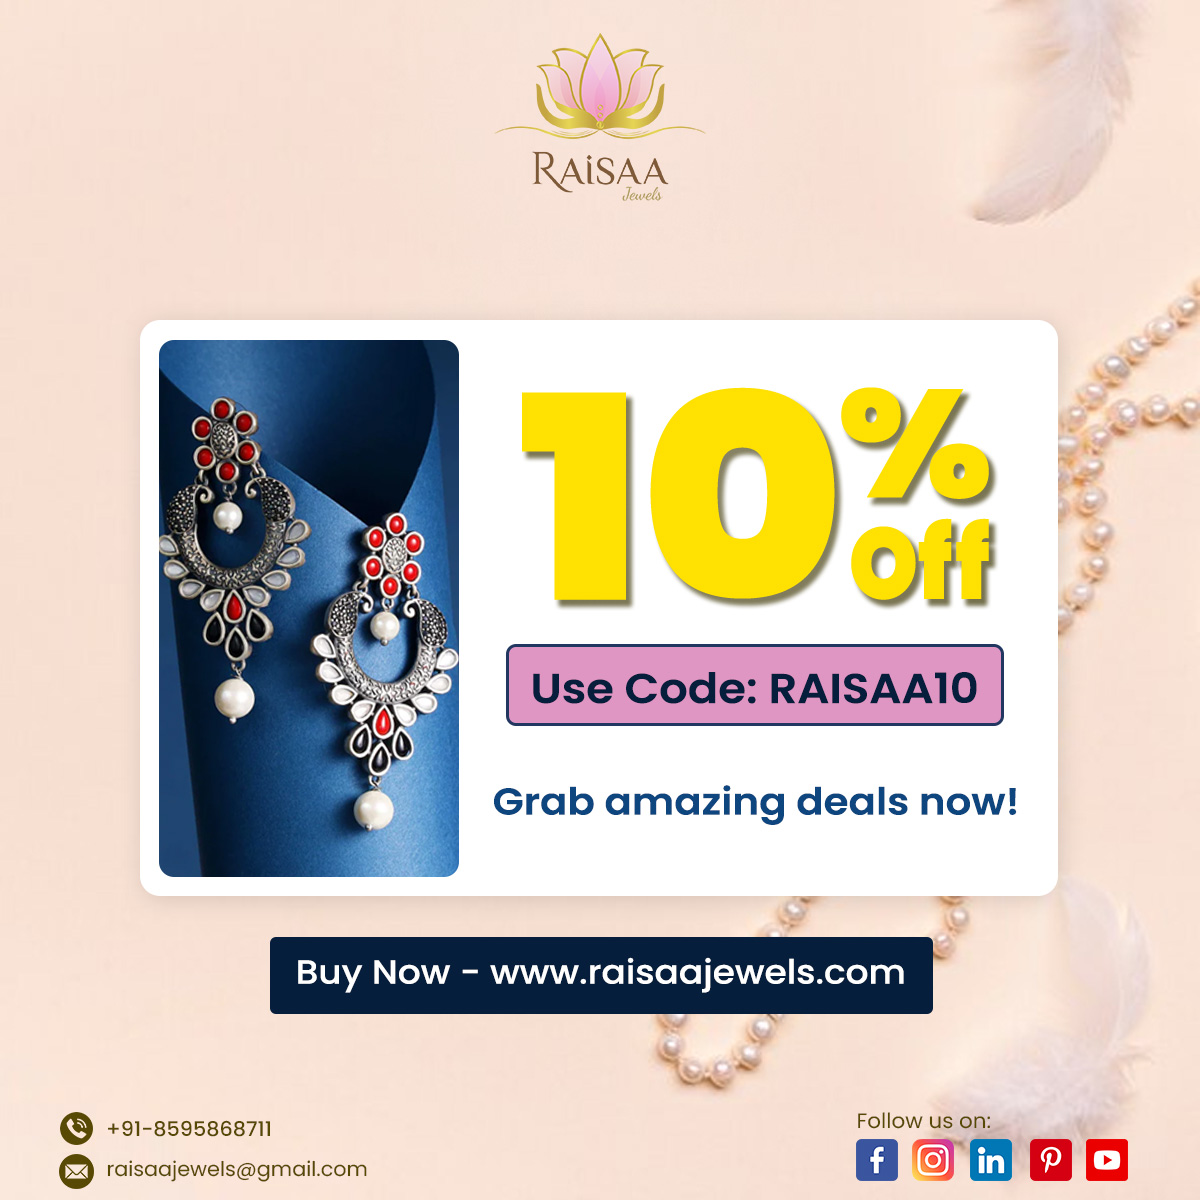 🌟✨ Attention Jewellery Lovers! ✨🌟

Indulge in luxury without breaking the bank! 💍💎 Enjoy a dazzling 10% OFF on all Raisaa Jewels pieces with code: RAISAA10! 💖 Don't miss out on these amazing deals!

Shop here: raisaajewels.com

#RaisaaJewels #JewelleryLovers